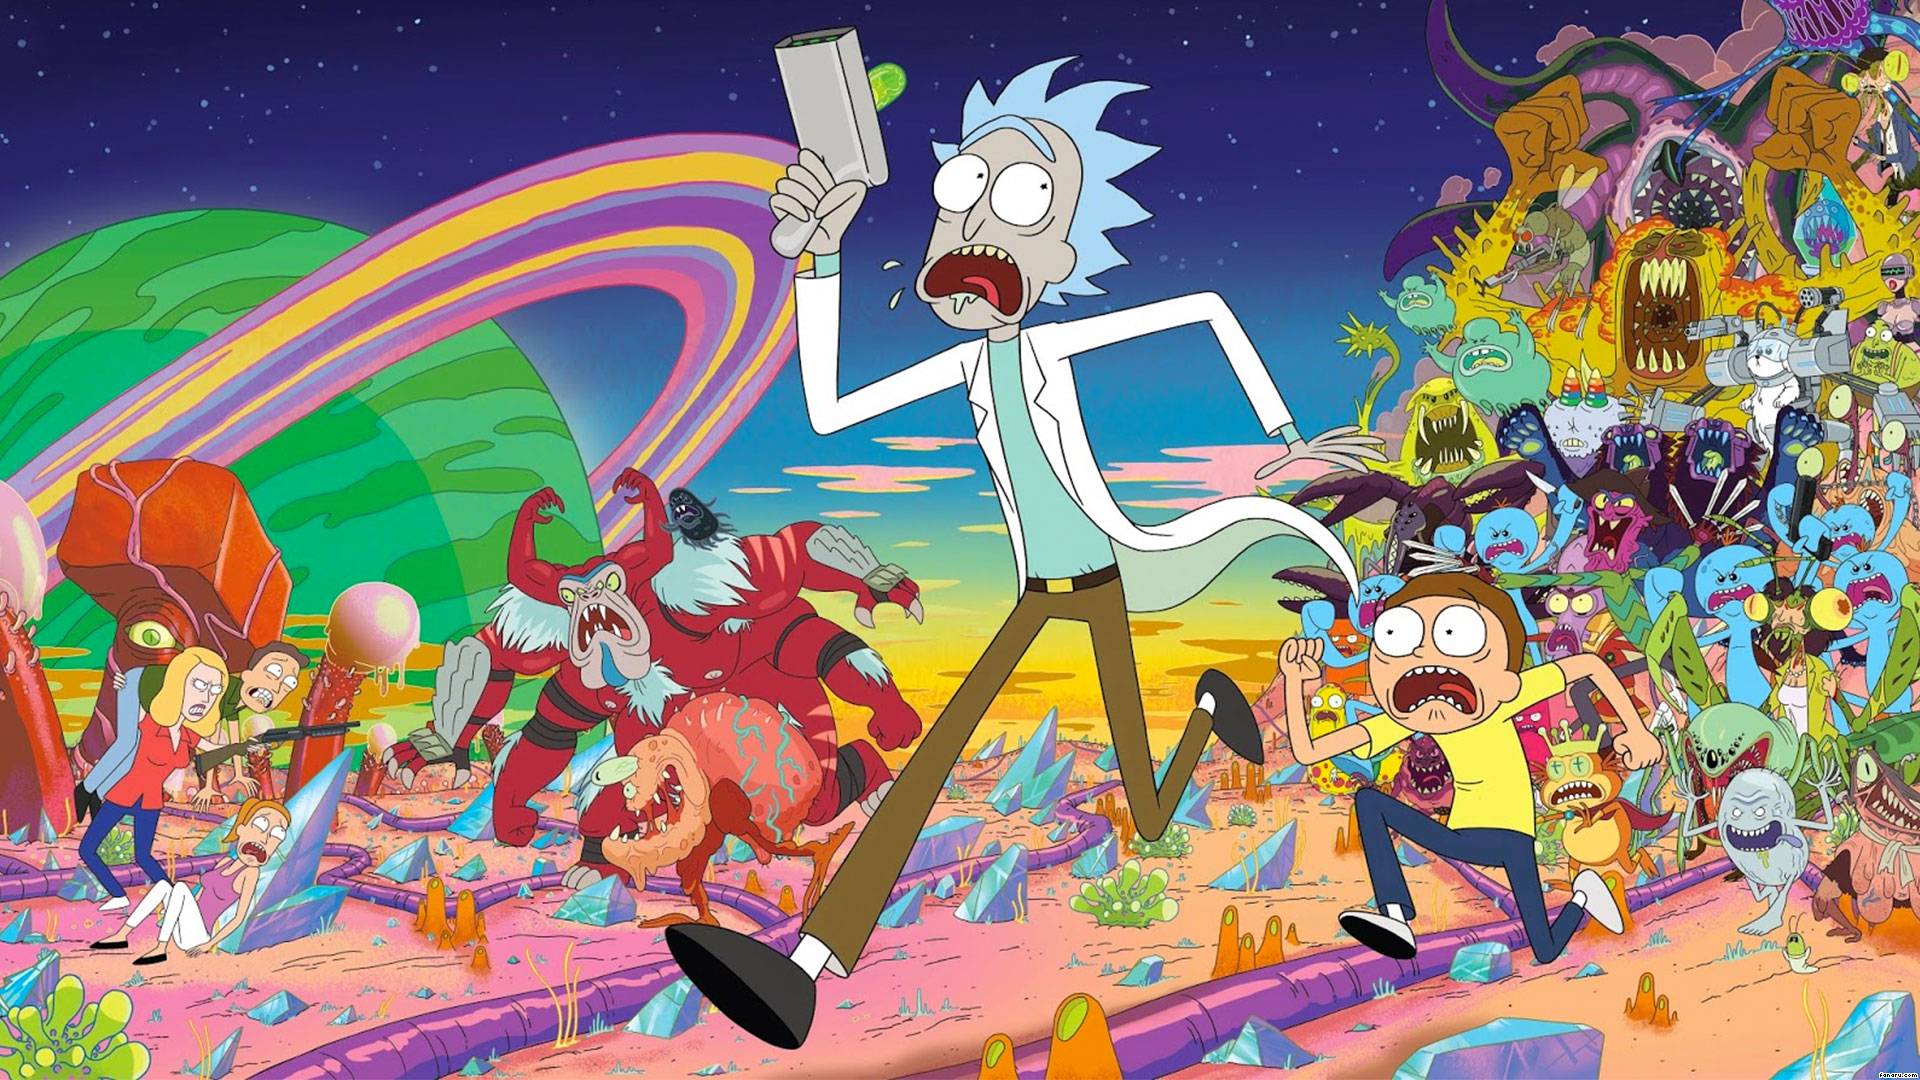 While we wait for 'Rick and Morty' S4, we’re going over our fave Interdimensional Cable spots in a ferocious fever to suck up all the hype possible.